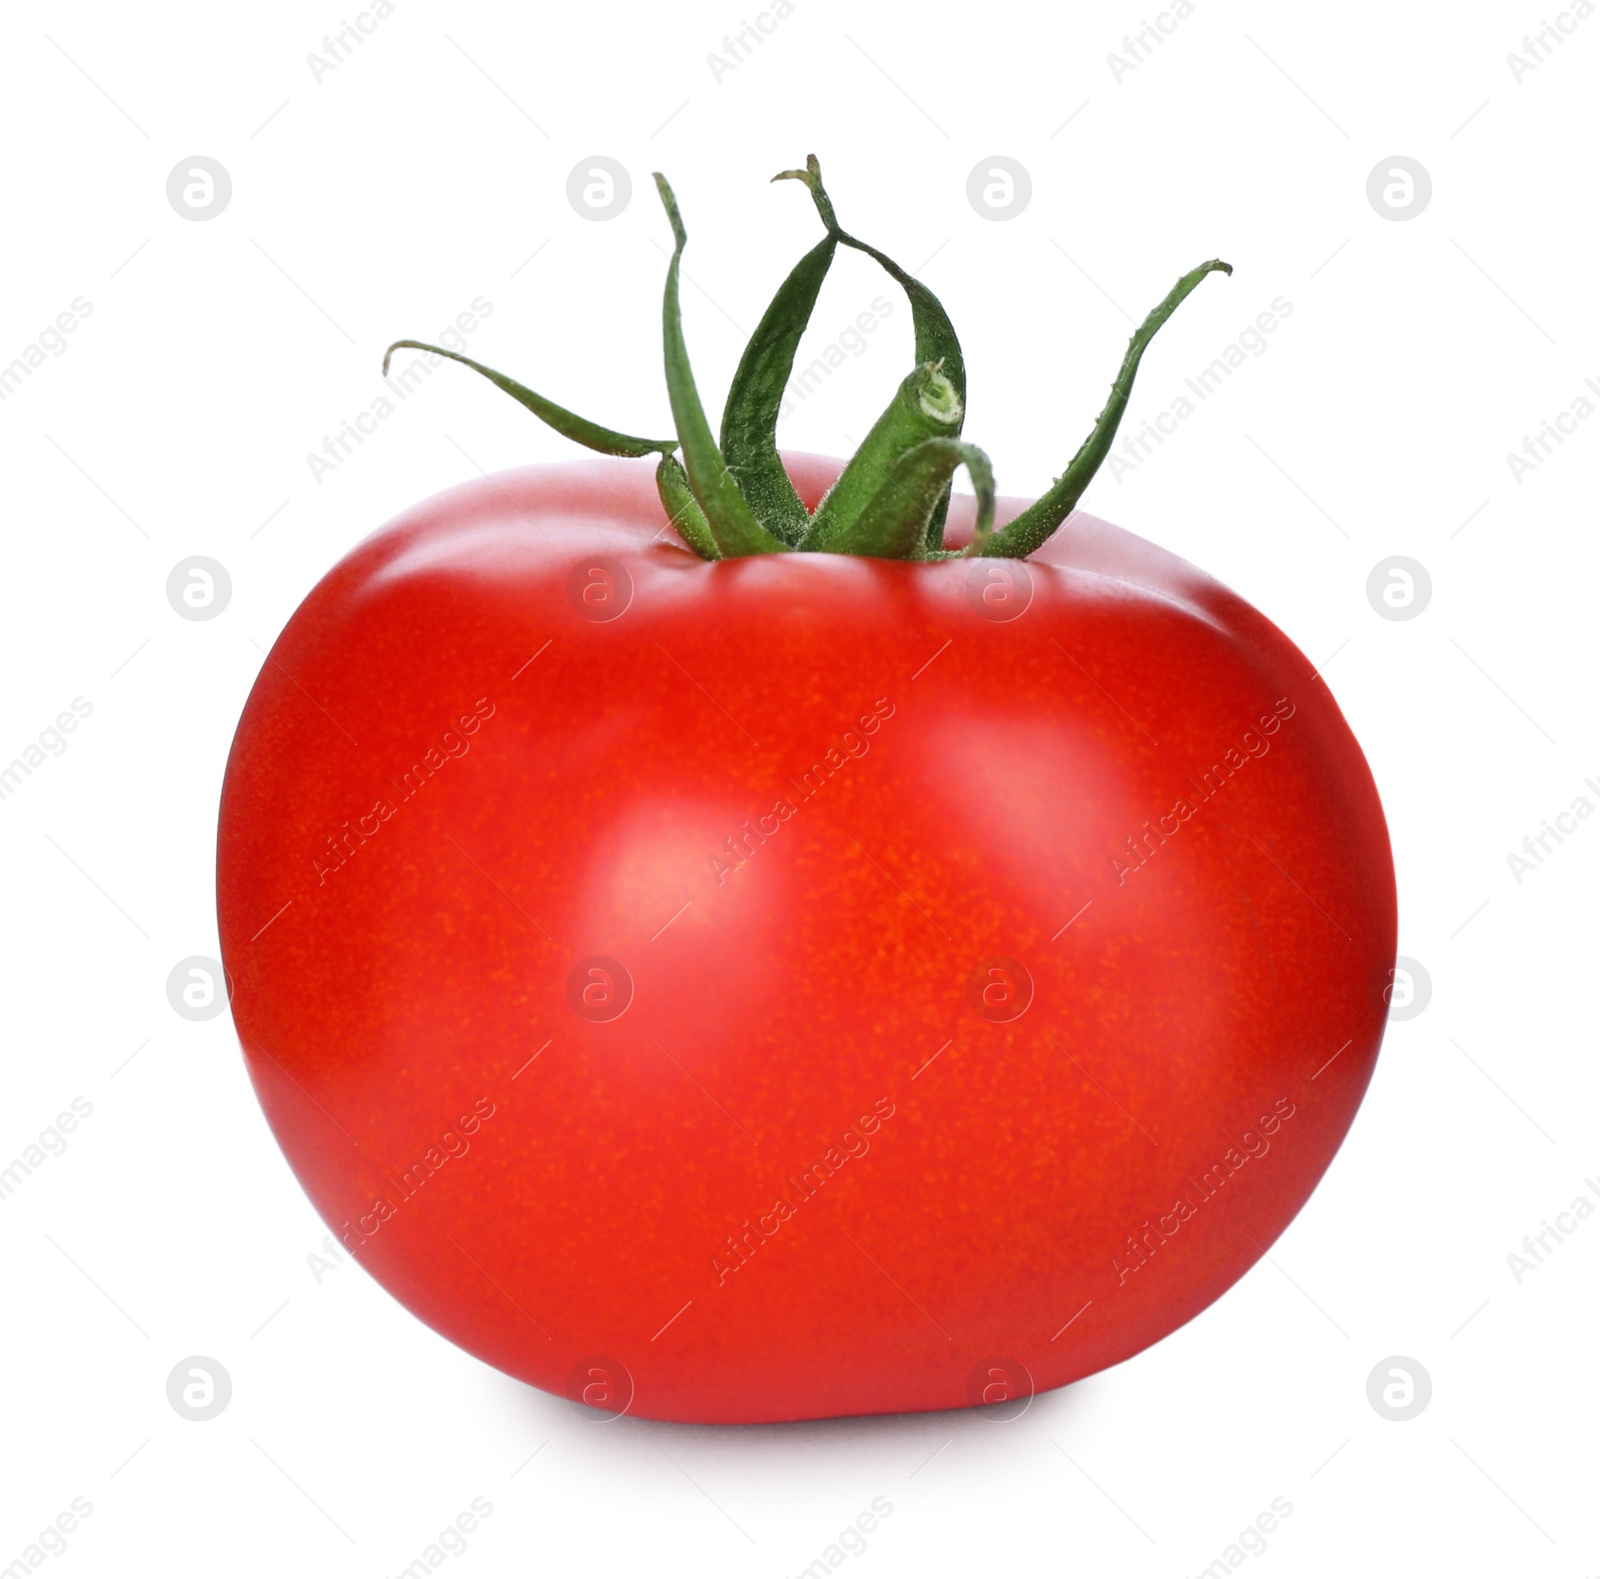 Photo of Tasty ripe tomato with leaves isolated on white